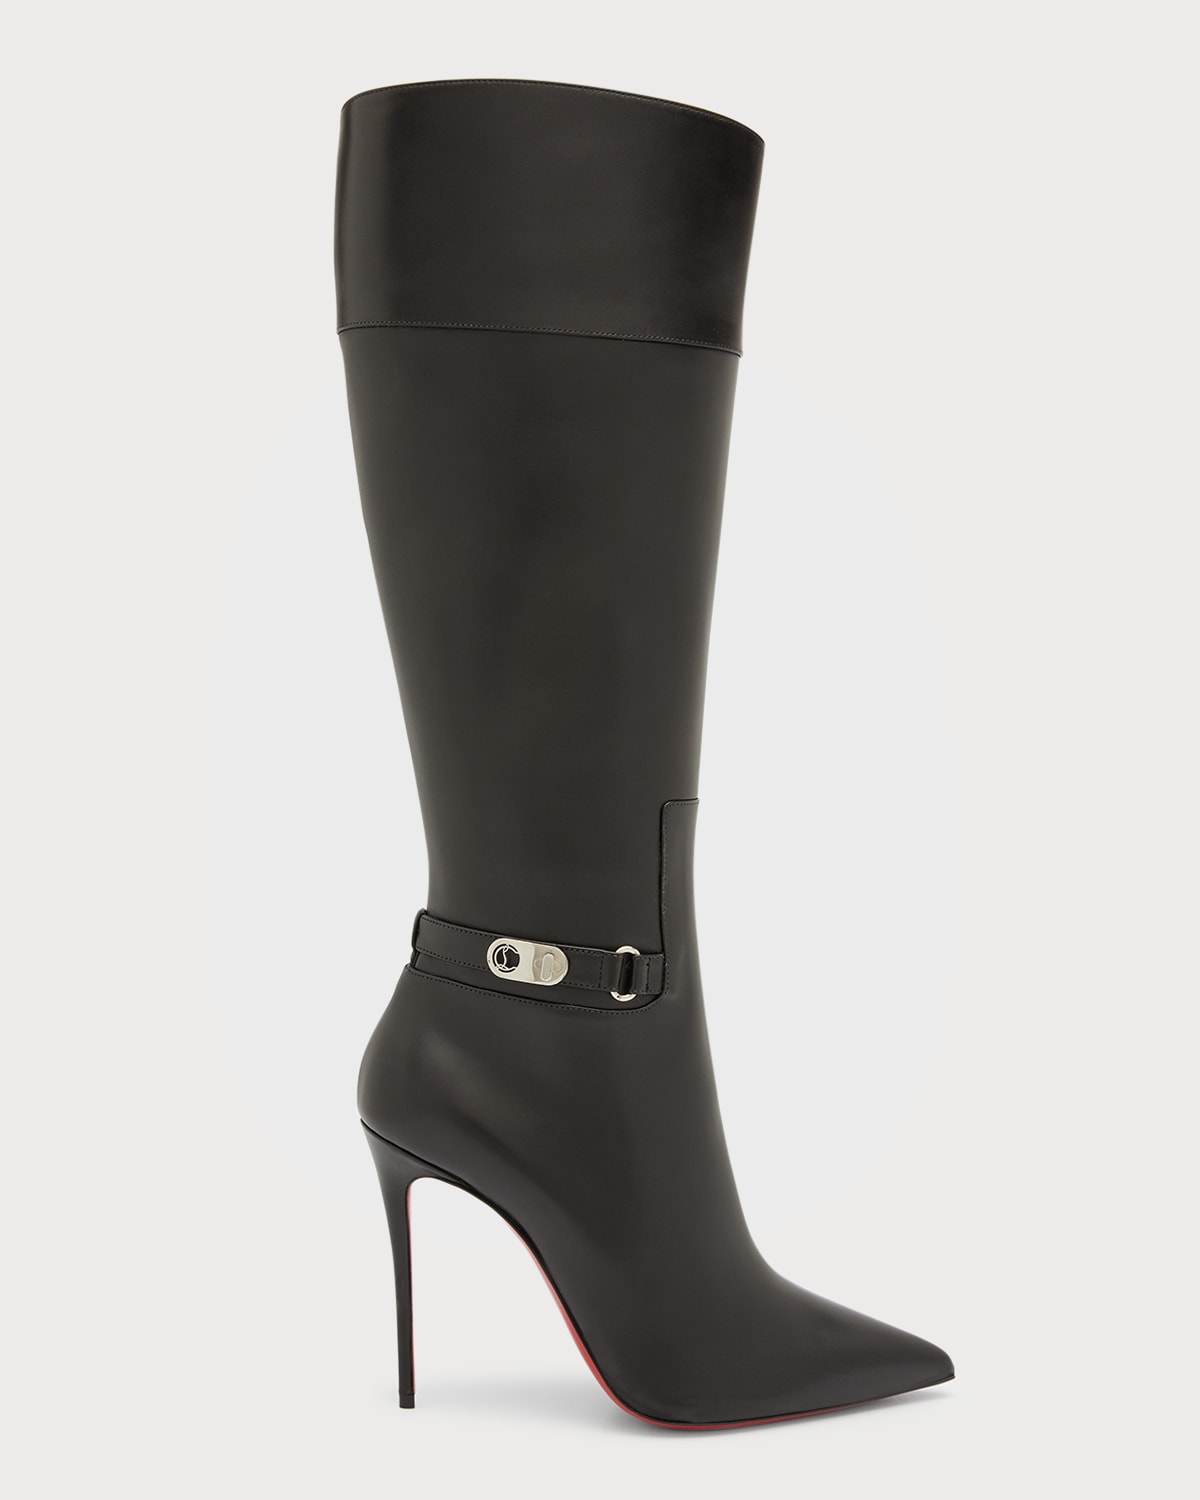 Christian Louboutin Lock Kate Botta Leather Red Sole Boots